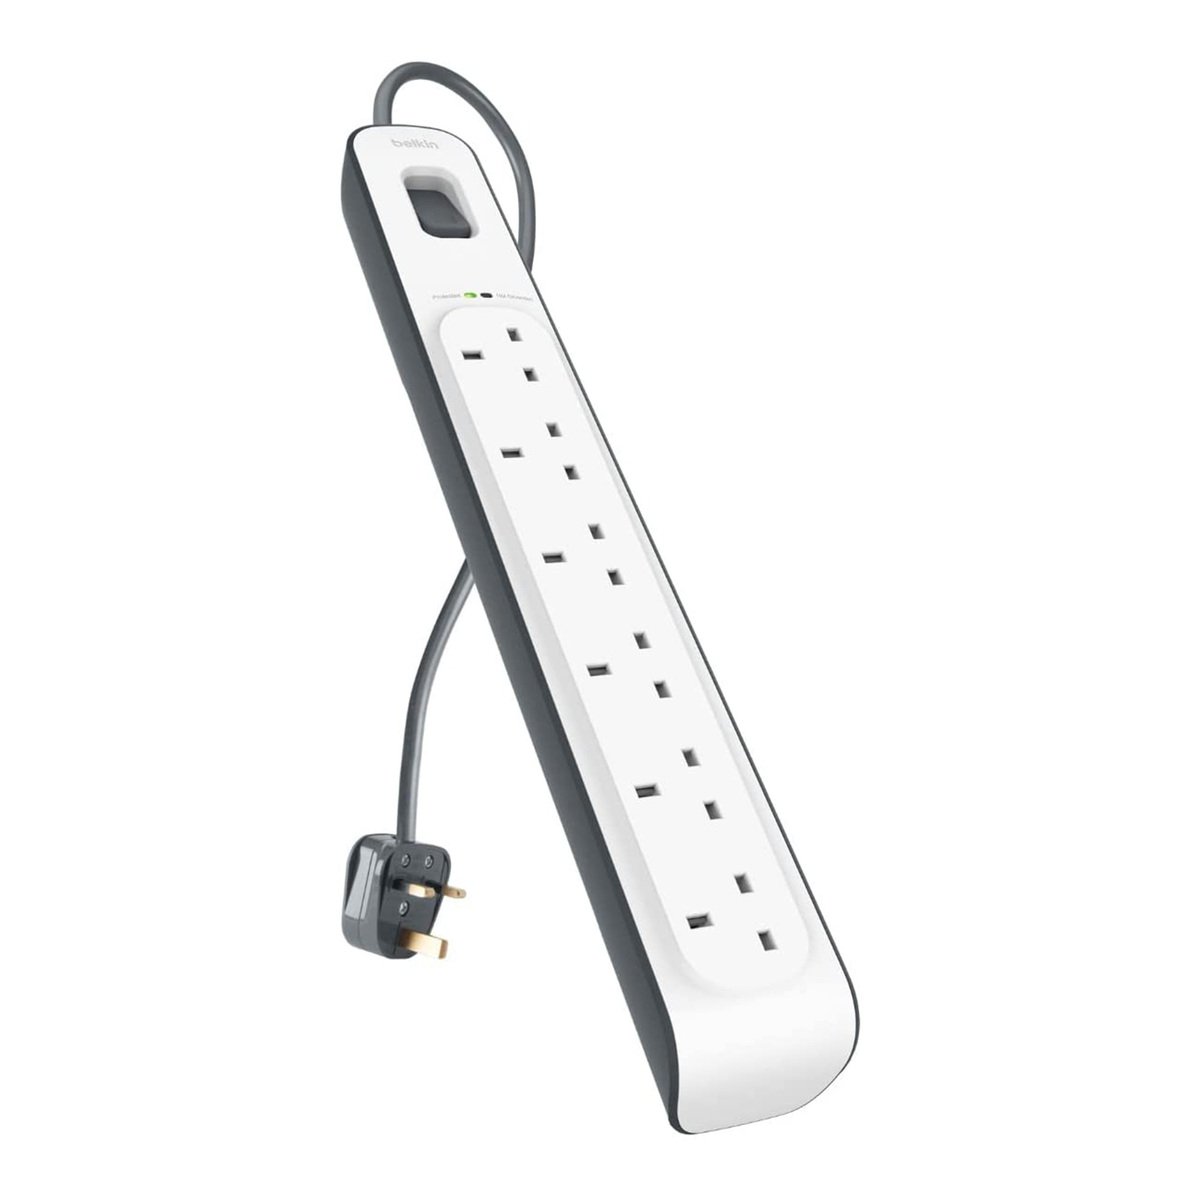 Belkin Surge Protector 6 Out BSV603AR2M